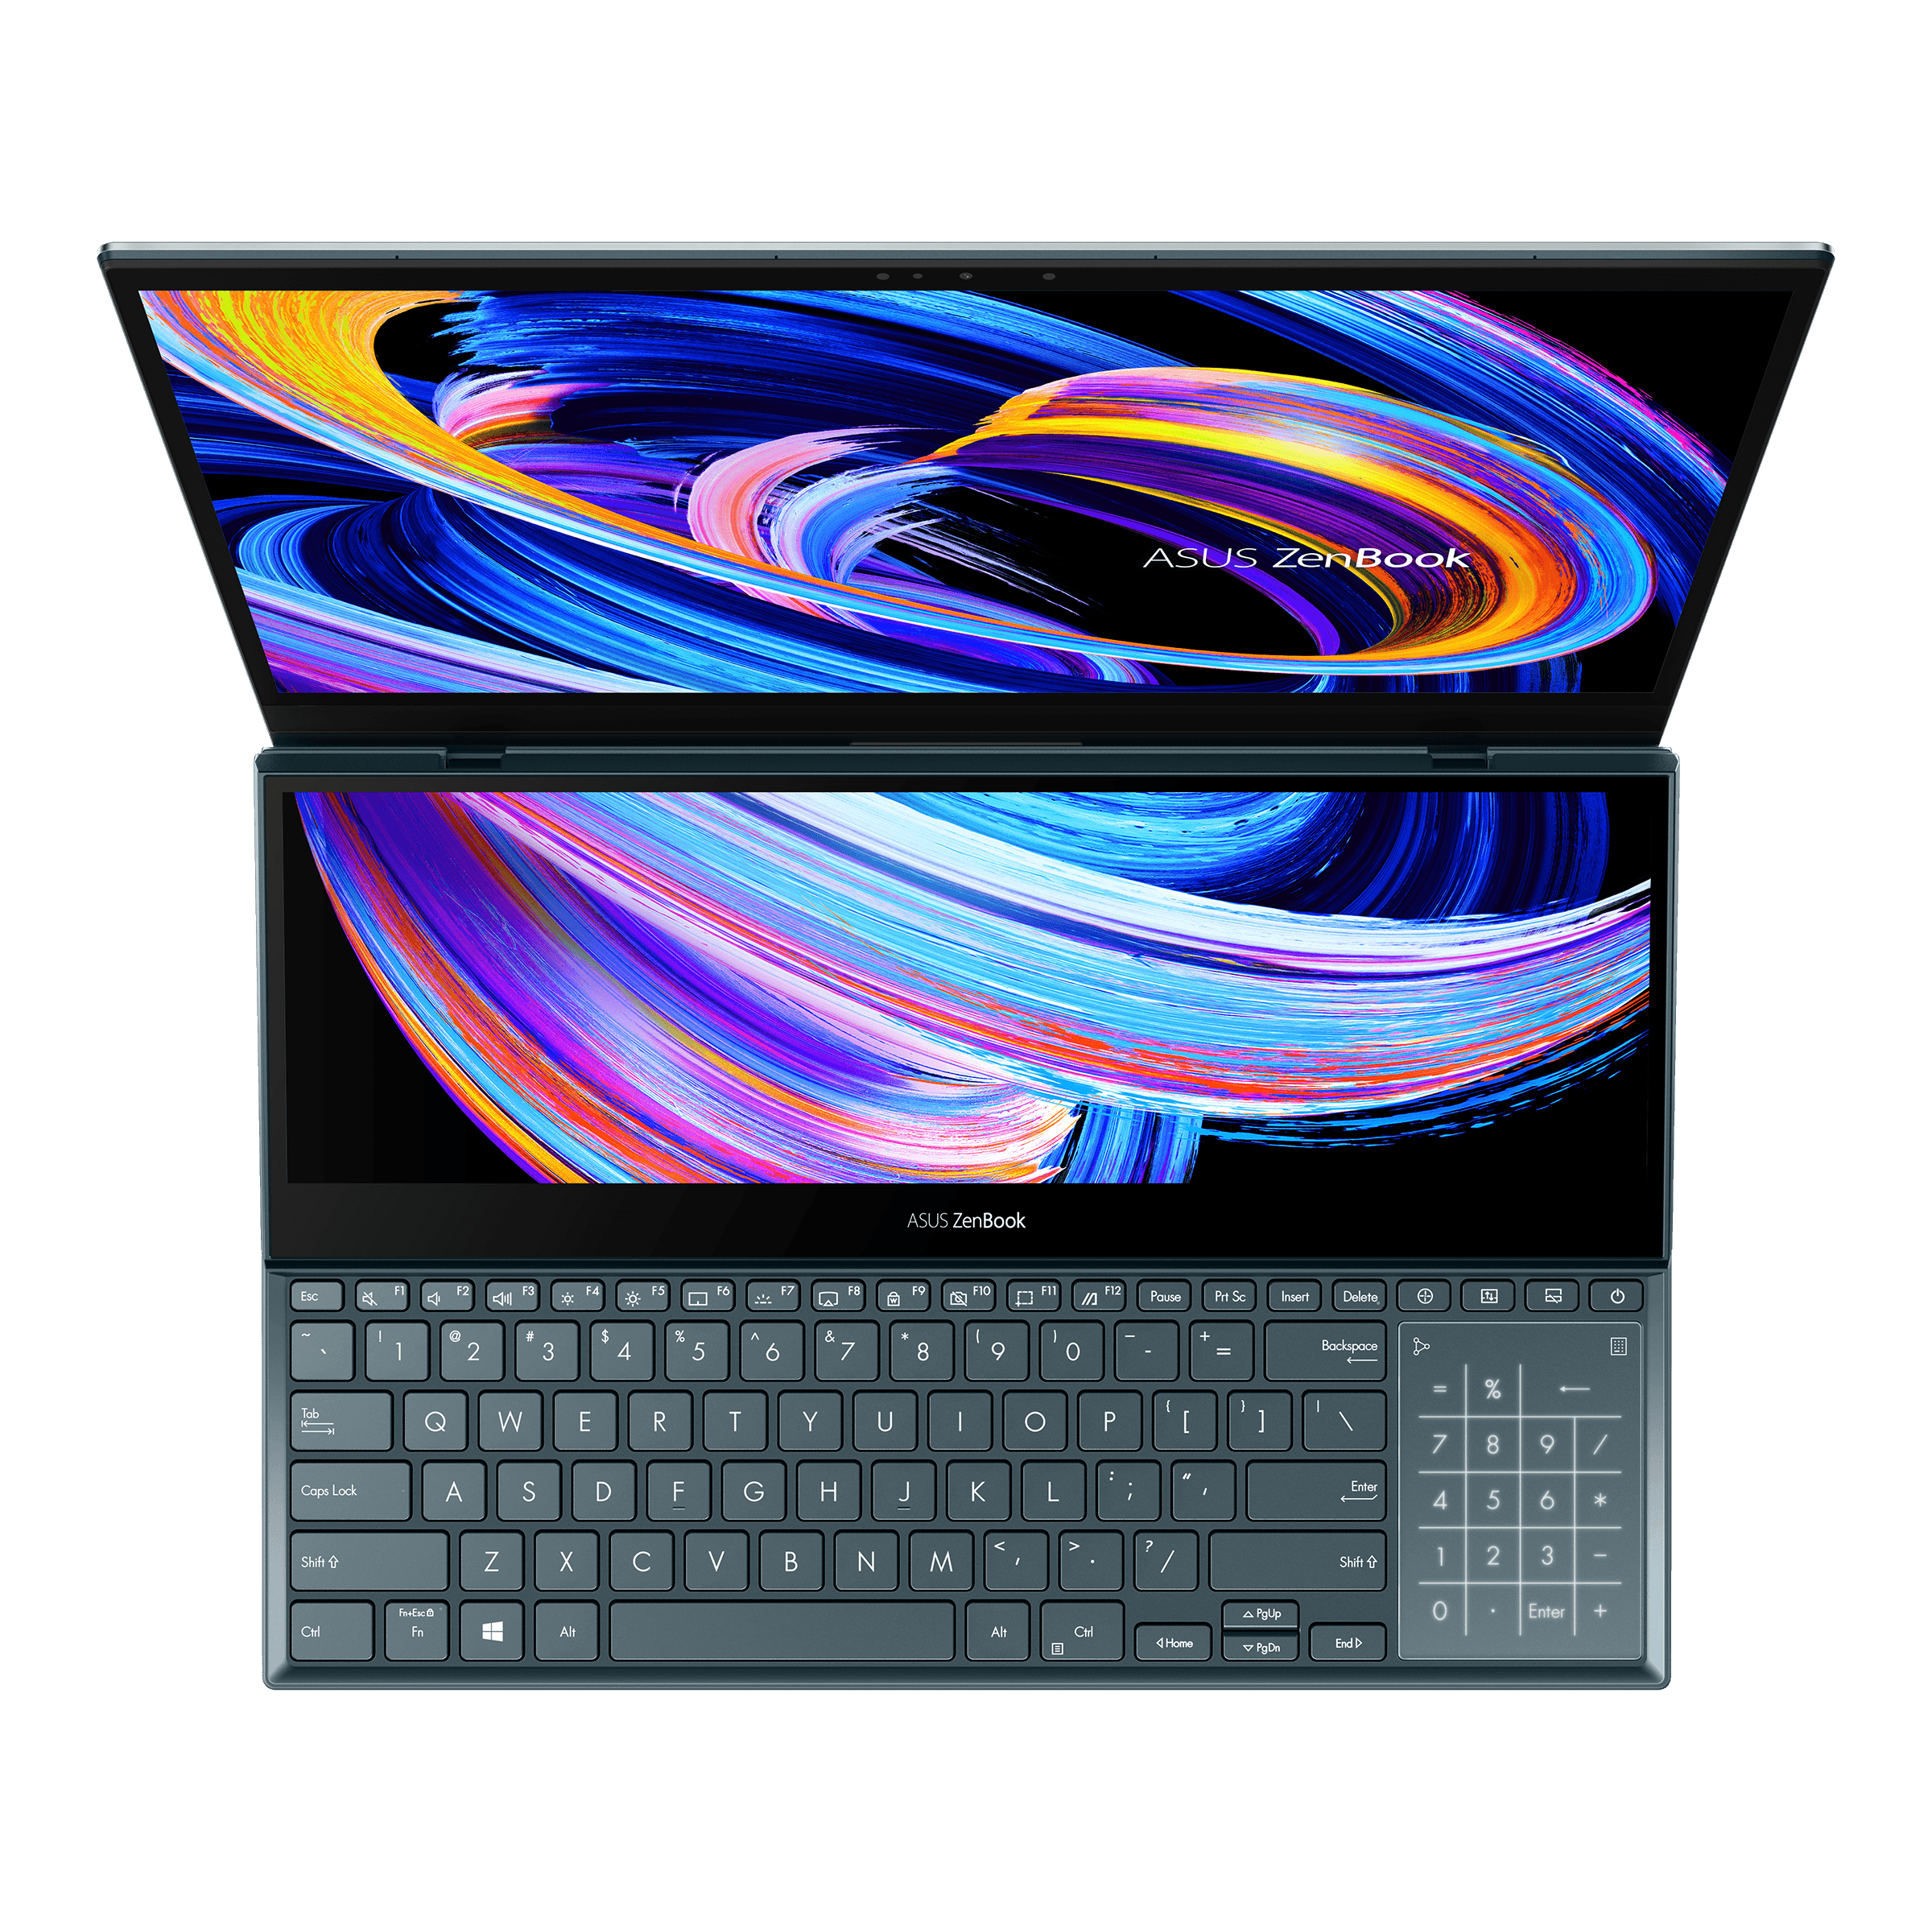 ASUS Zenbook Pro Duo 15 OLED UX582ZW-OLED209W Laptop Intel Core i9-12900H 32GB 1TB SSD NVIDIA GeForce RTX 3070 Ti 8GB 15.6-inch 4K OLED Windows 11 Home - Celestial Blue